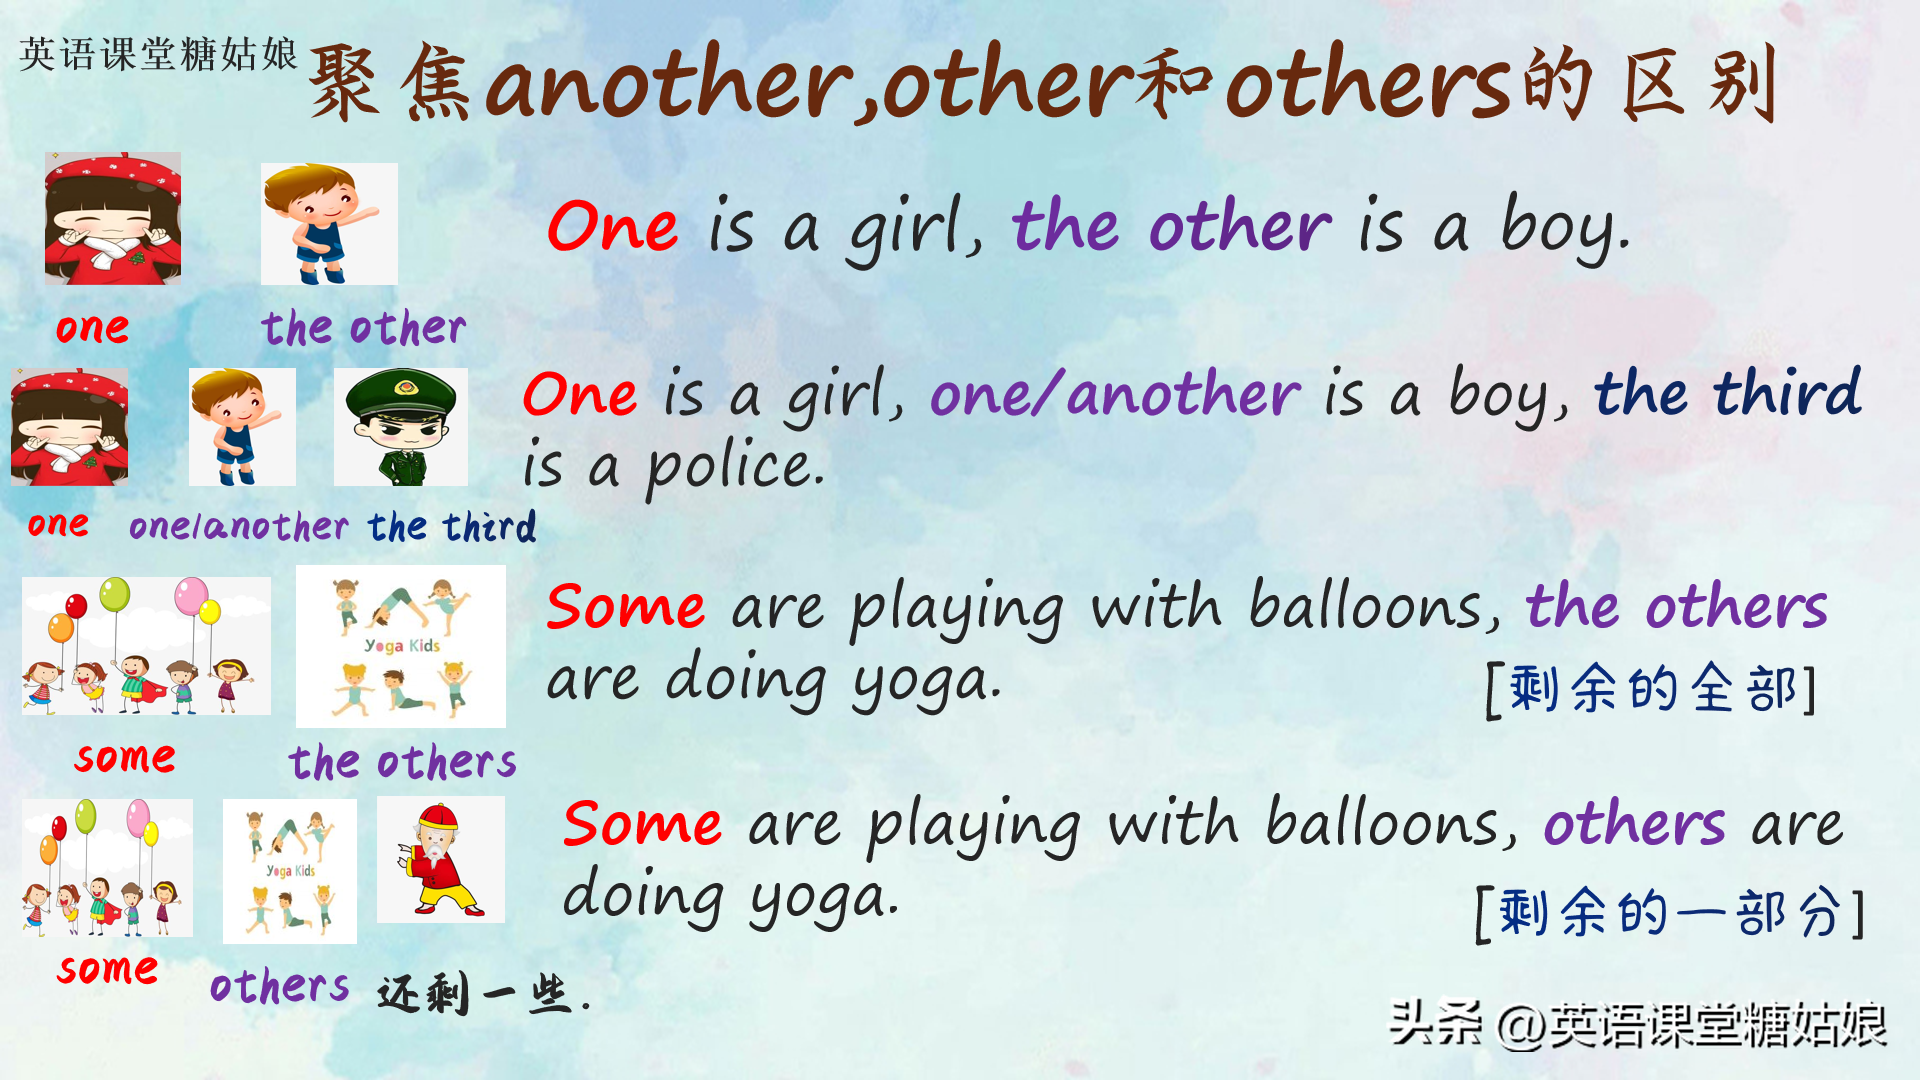 other和others的区别（another other与others的含义及用法）